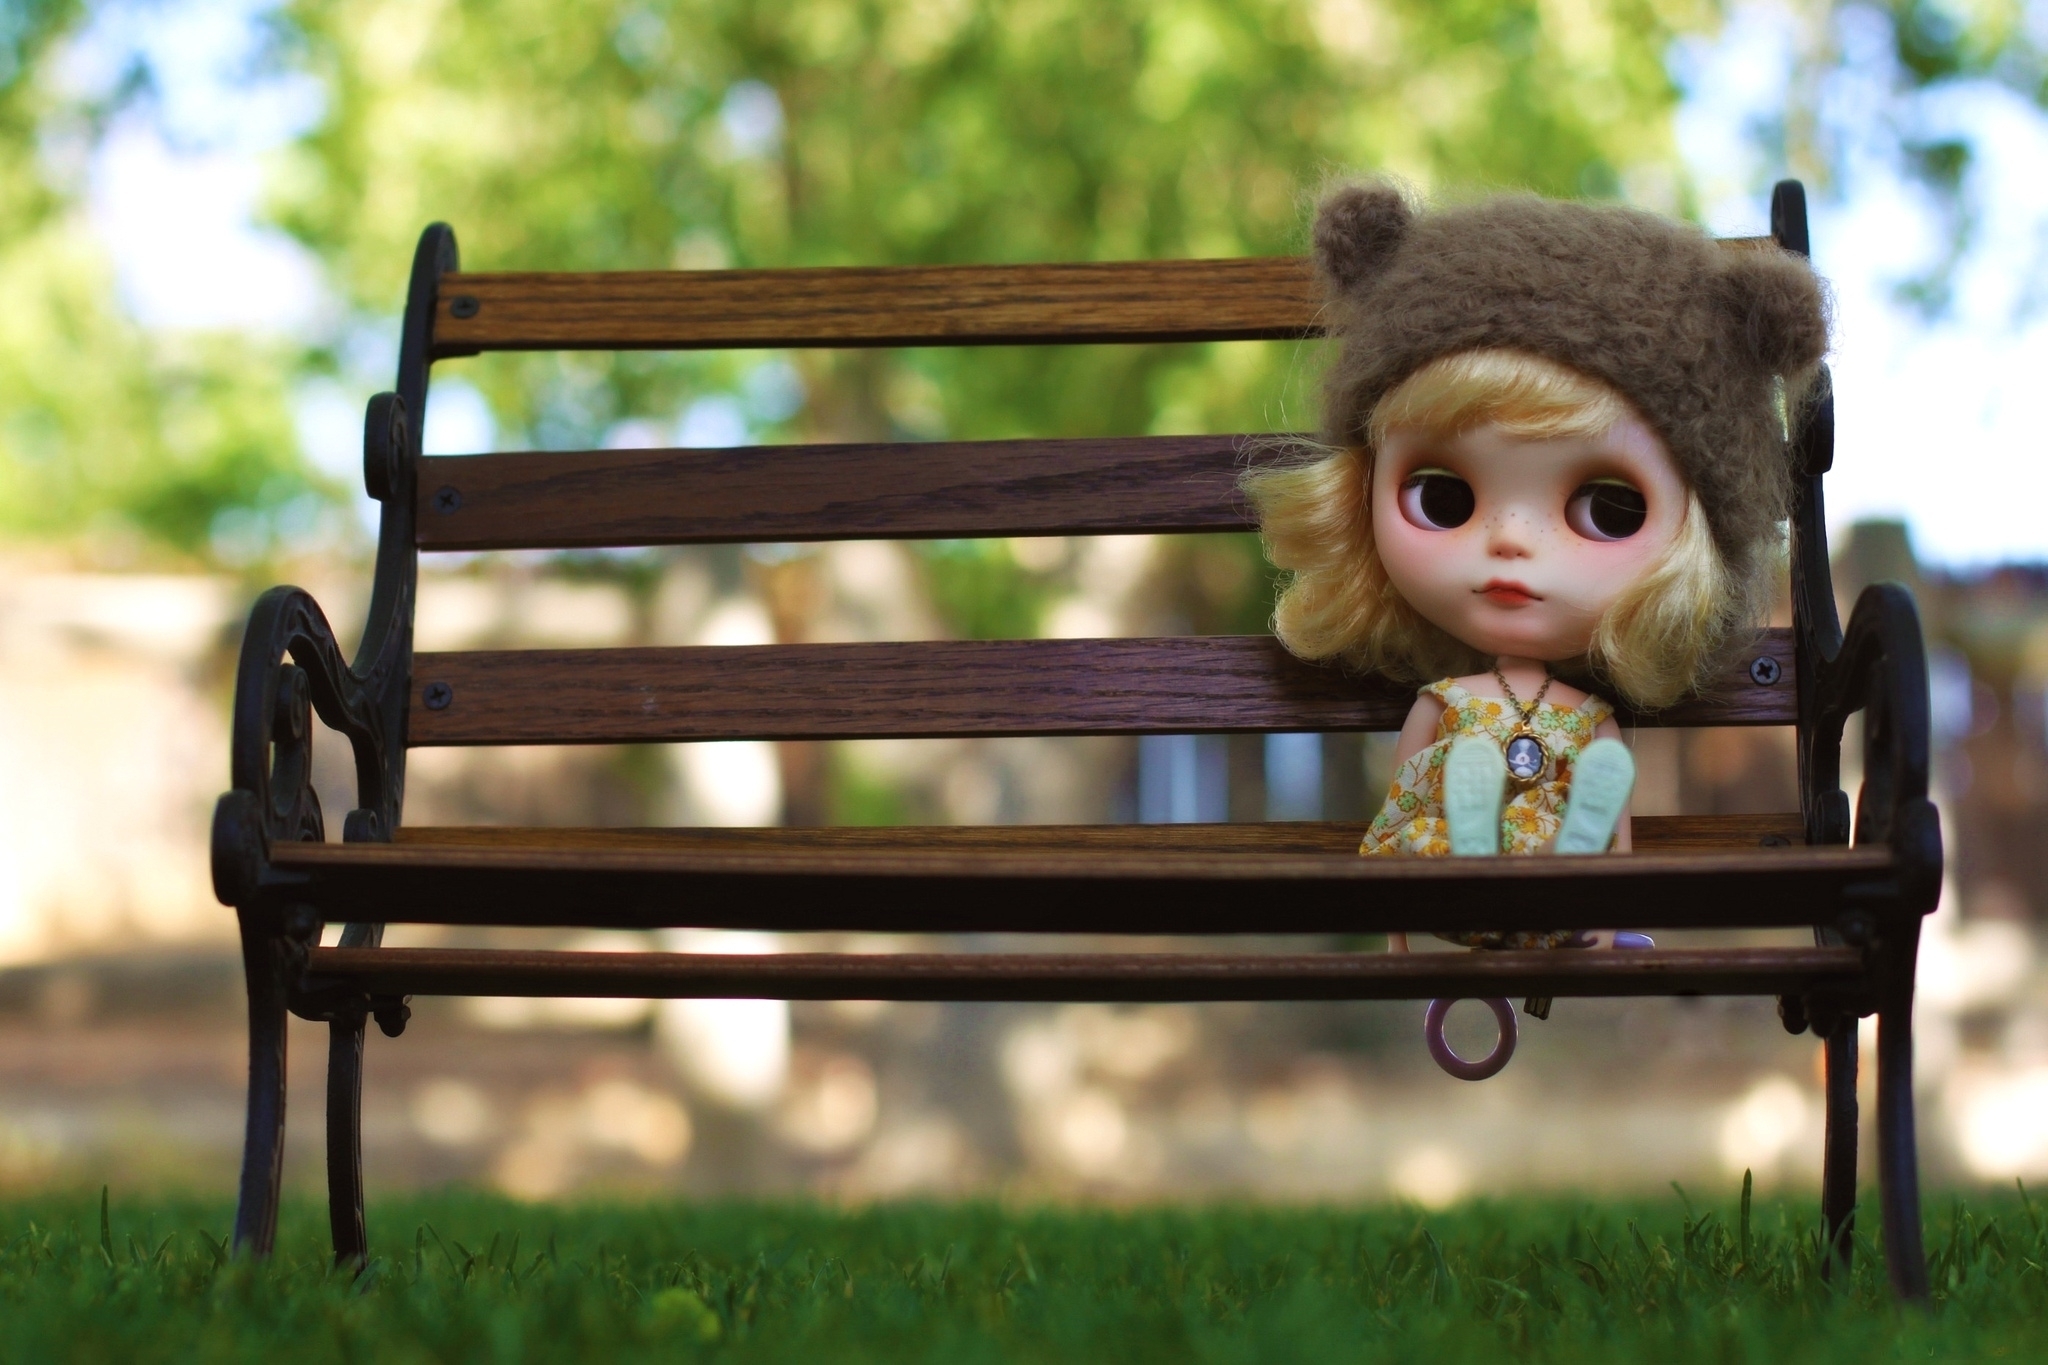 toys, Glance, Bench, Doll, Mood, Face, Eyes, Blondes, Girl, Cute, Children Wallpaper